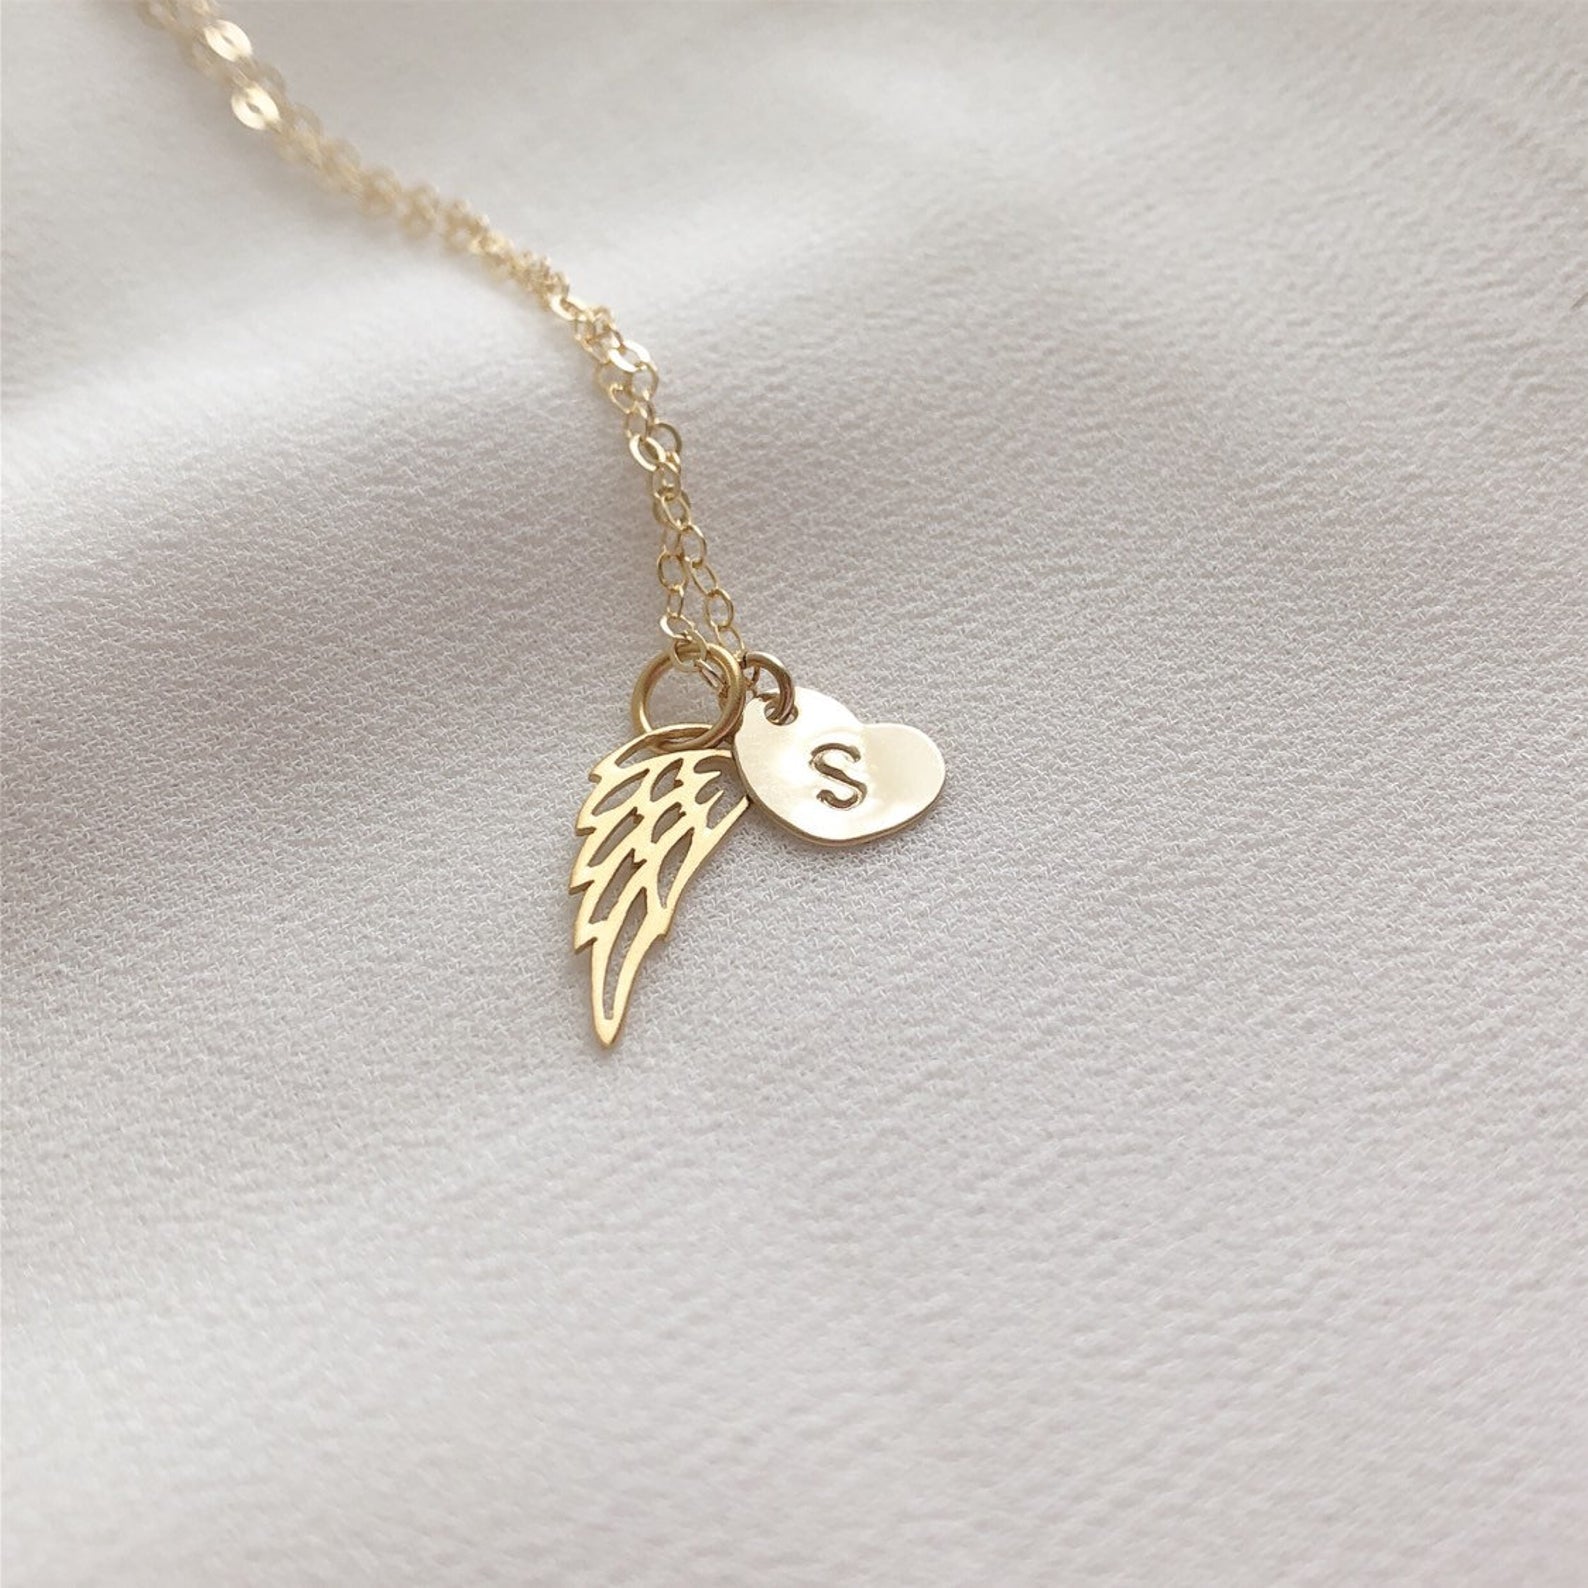 Angel Wing Necklace, Angel Wing Necklace, Angel Wing and Heart Necklace, Mother of An Angel, Infant Loss Necklace, Memorial Jewelry, Memorial Loss Necklace,